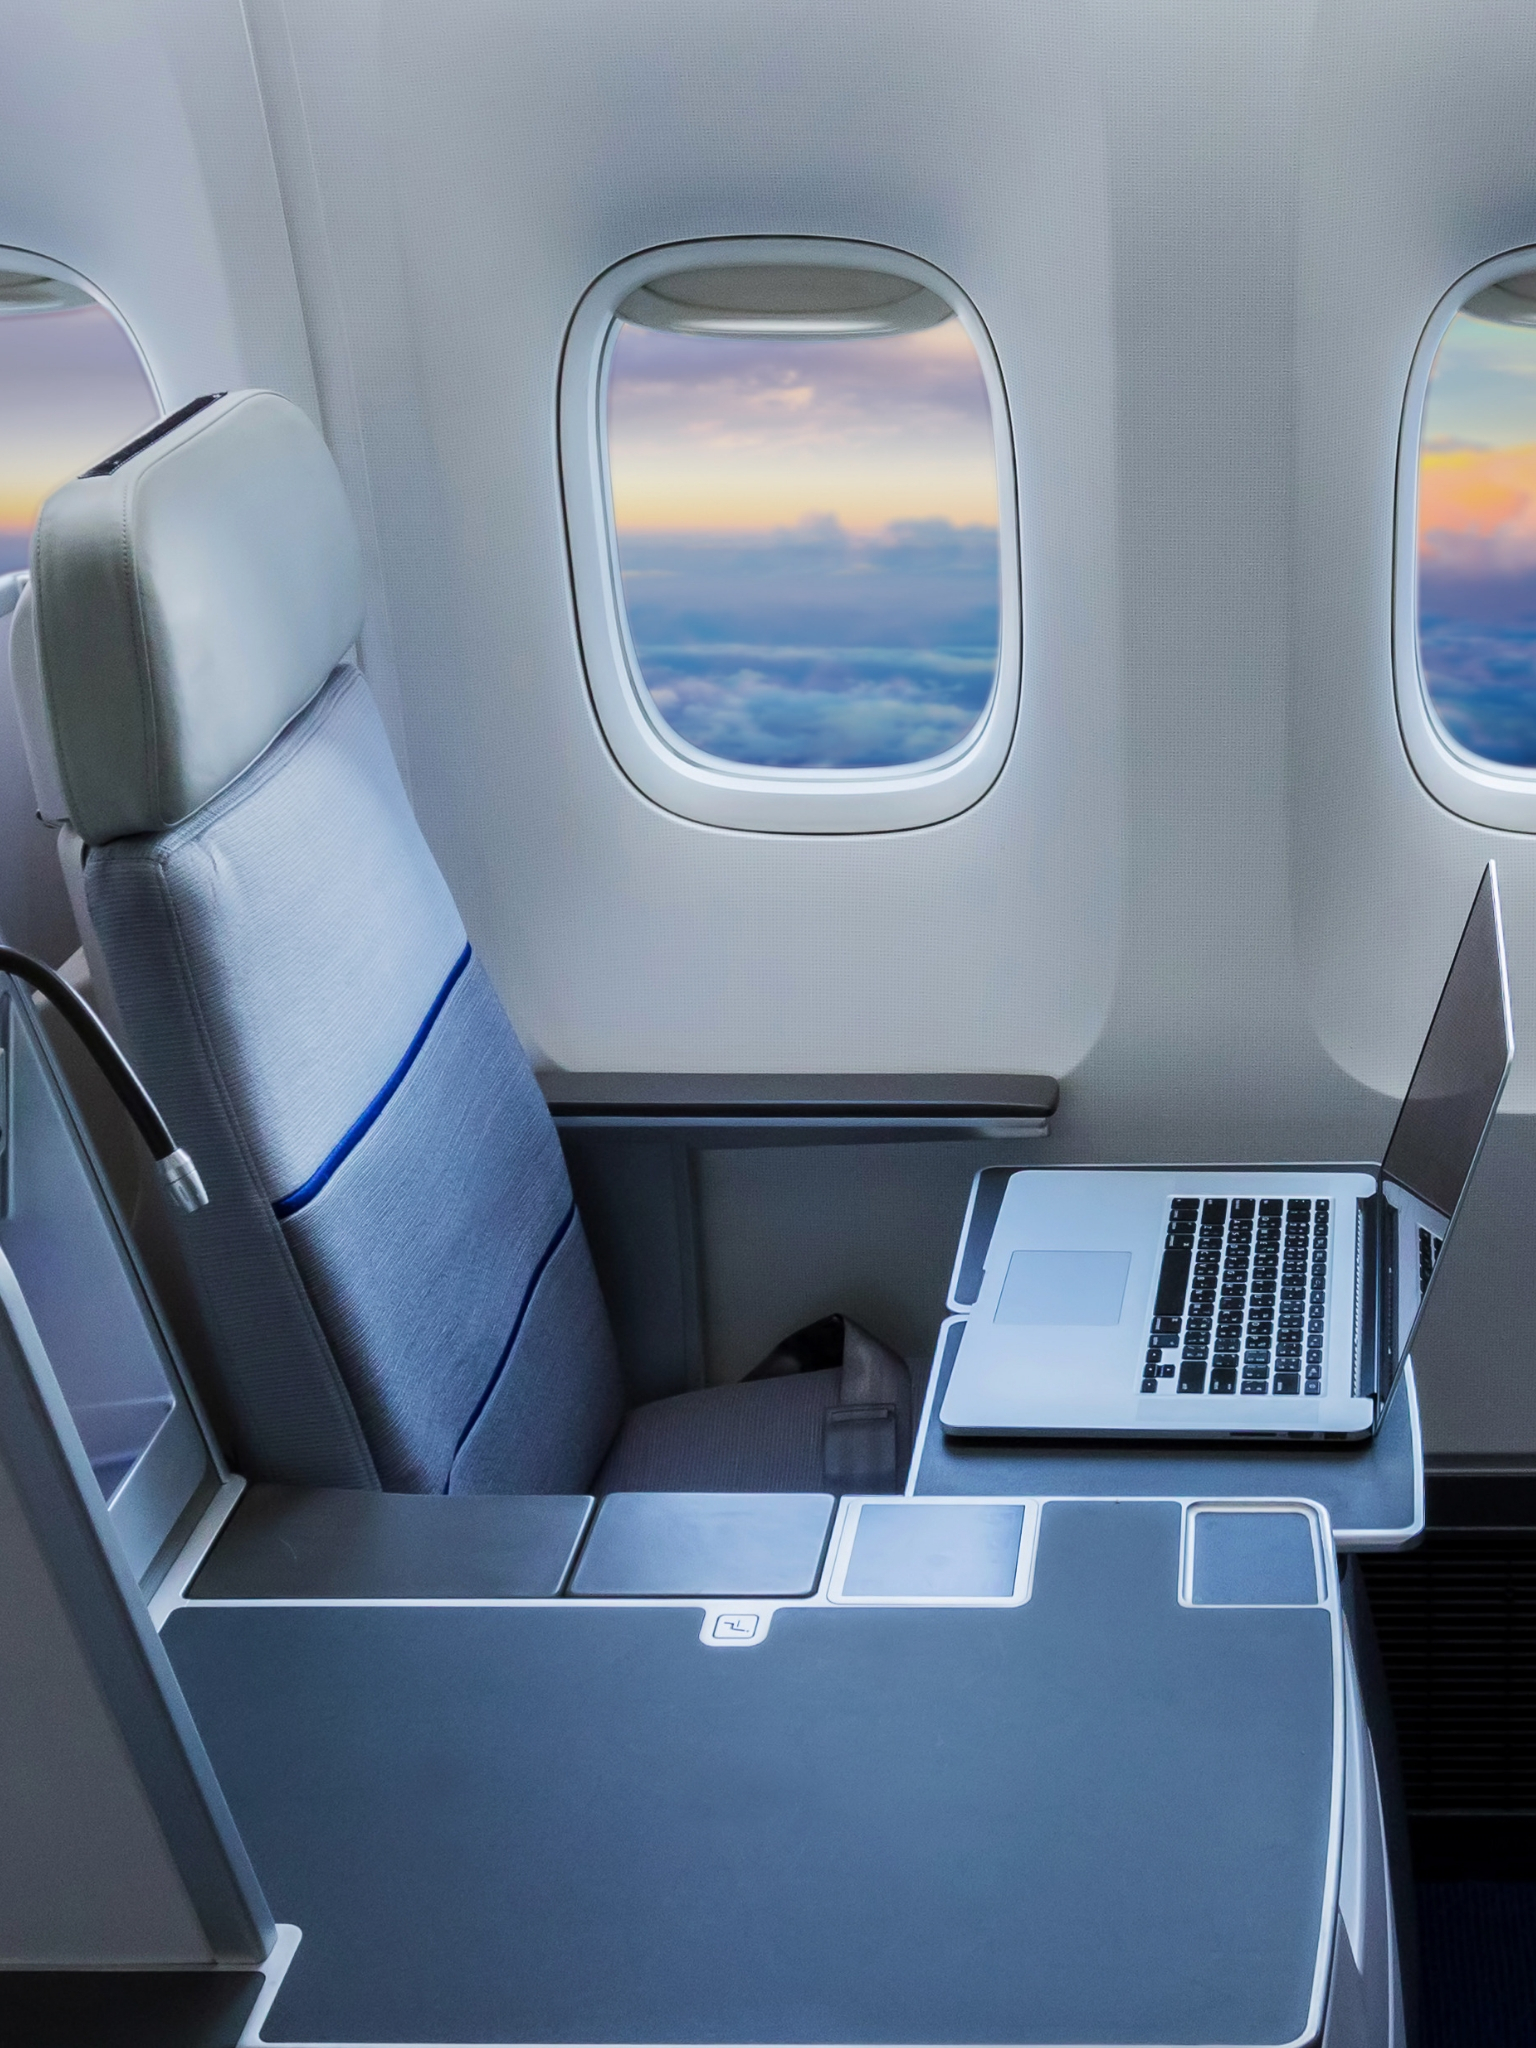 The Truth Behind How to Get a Business Class Upgrade